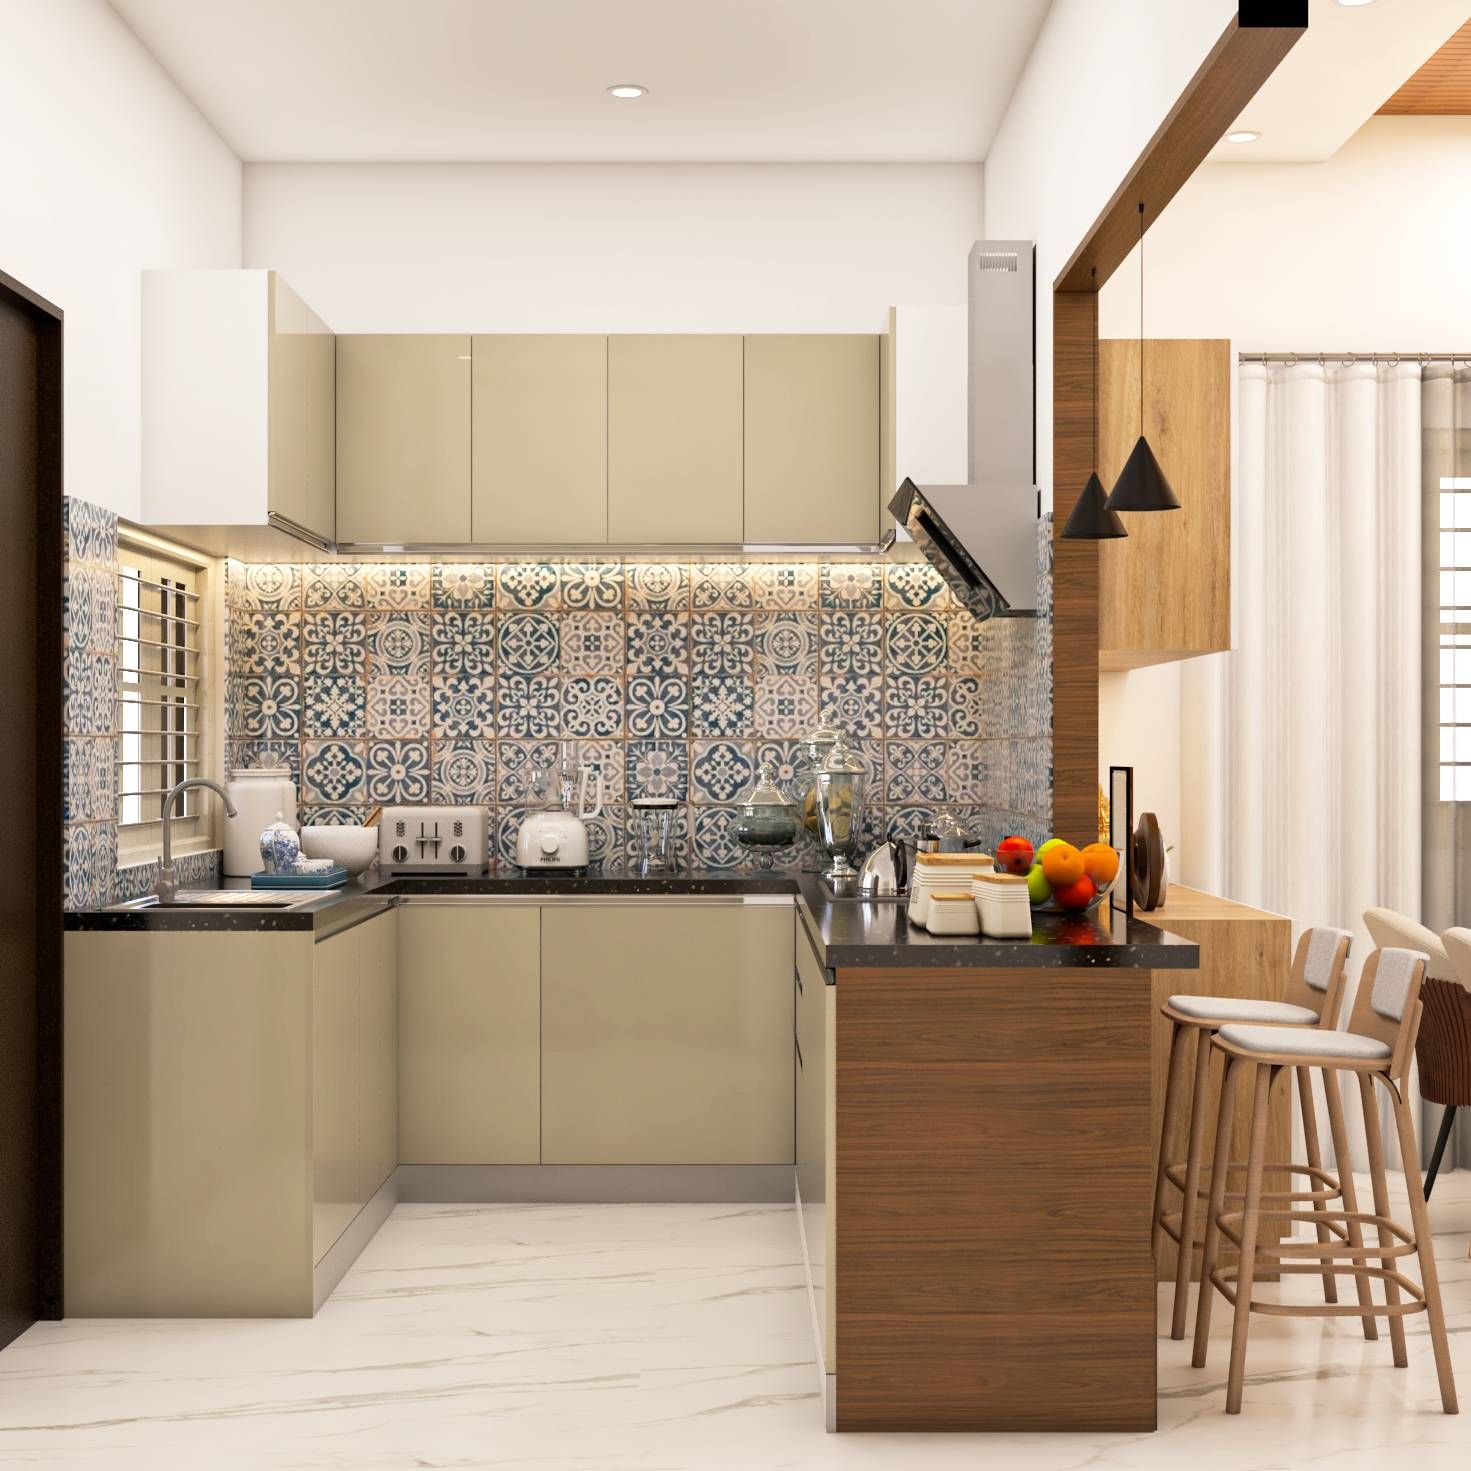 Modern U-Shaped Kitchen Design With A Breakfast Counter